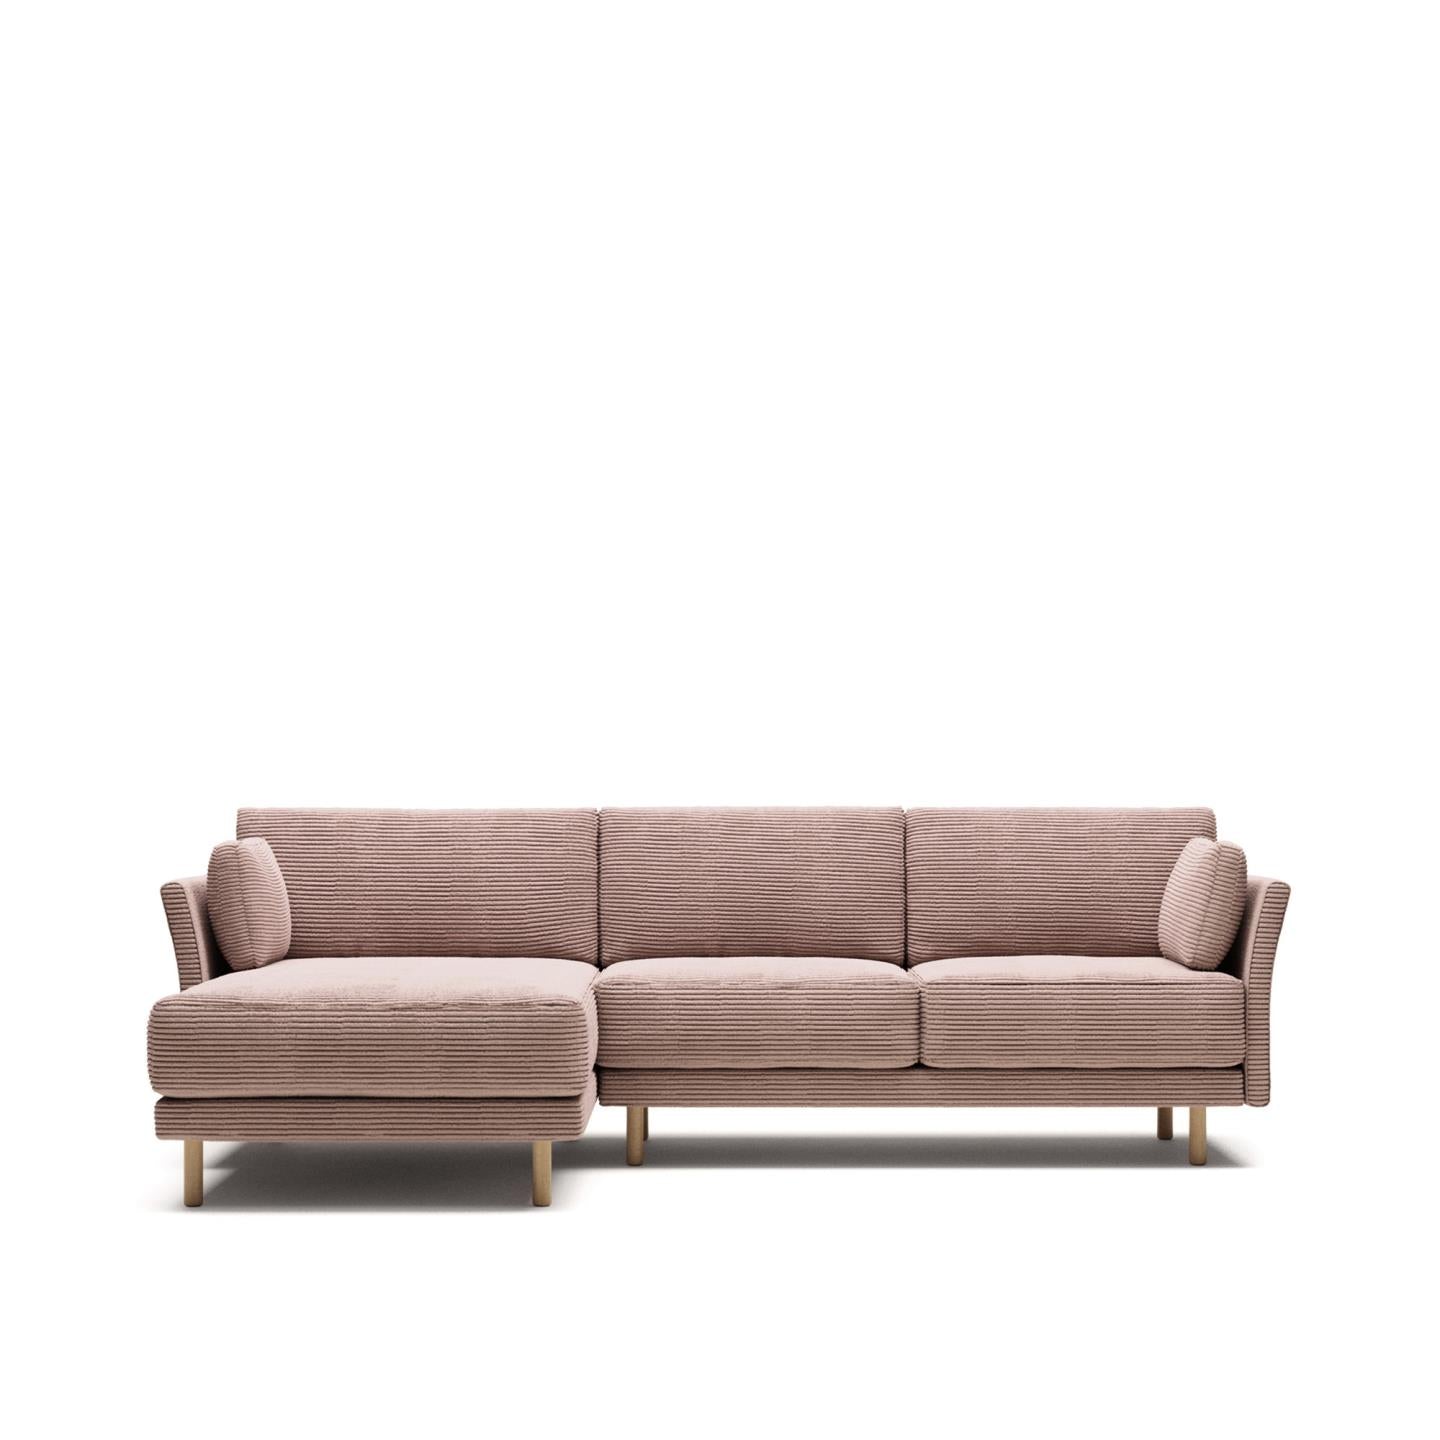 Sofia 3 Seater Sofa with Left/Right Side Chaise - Pink Corduroy